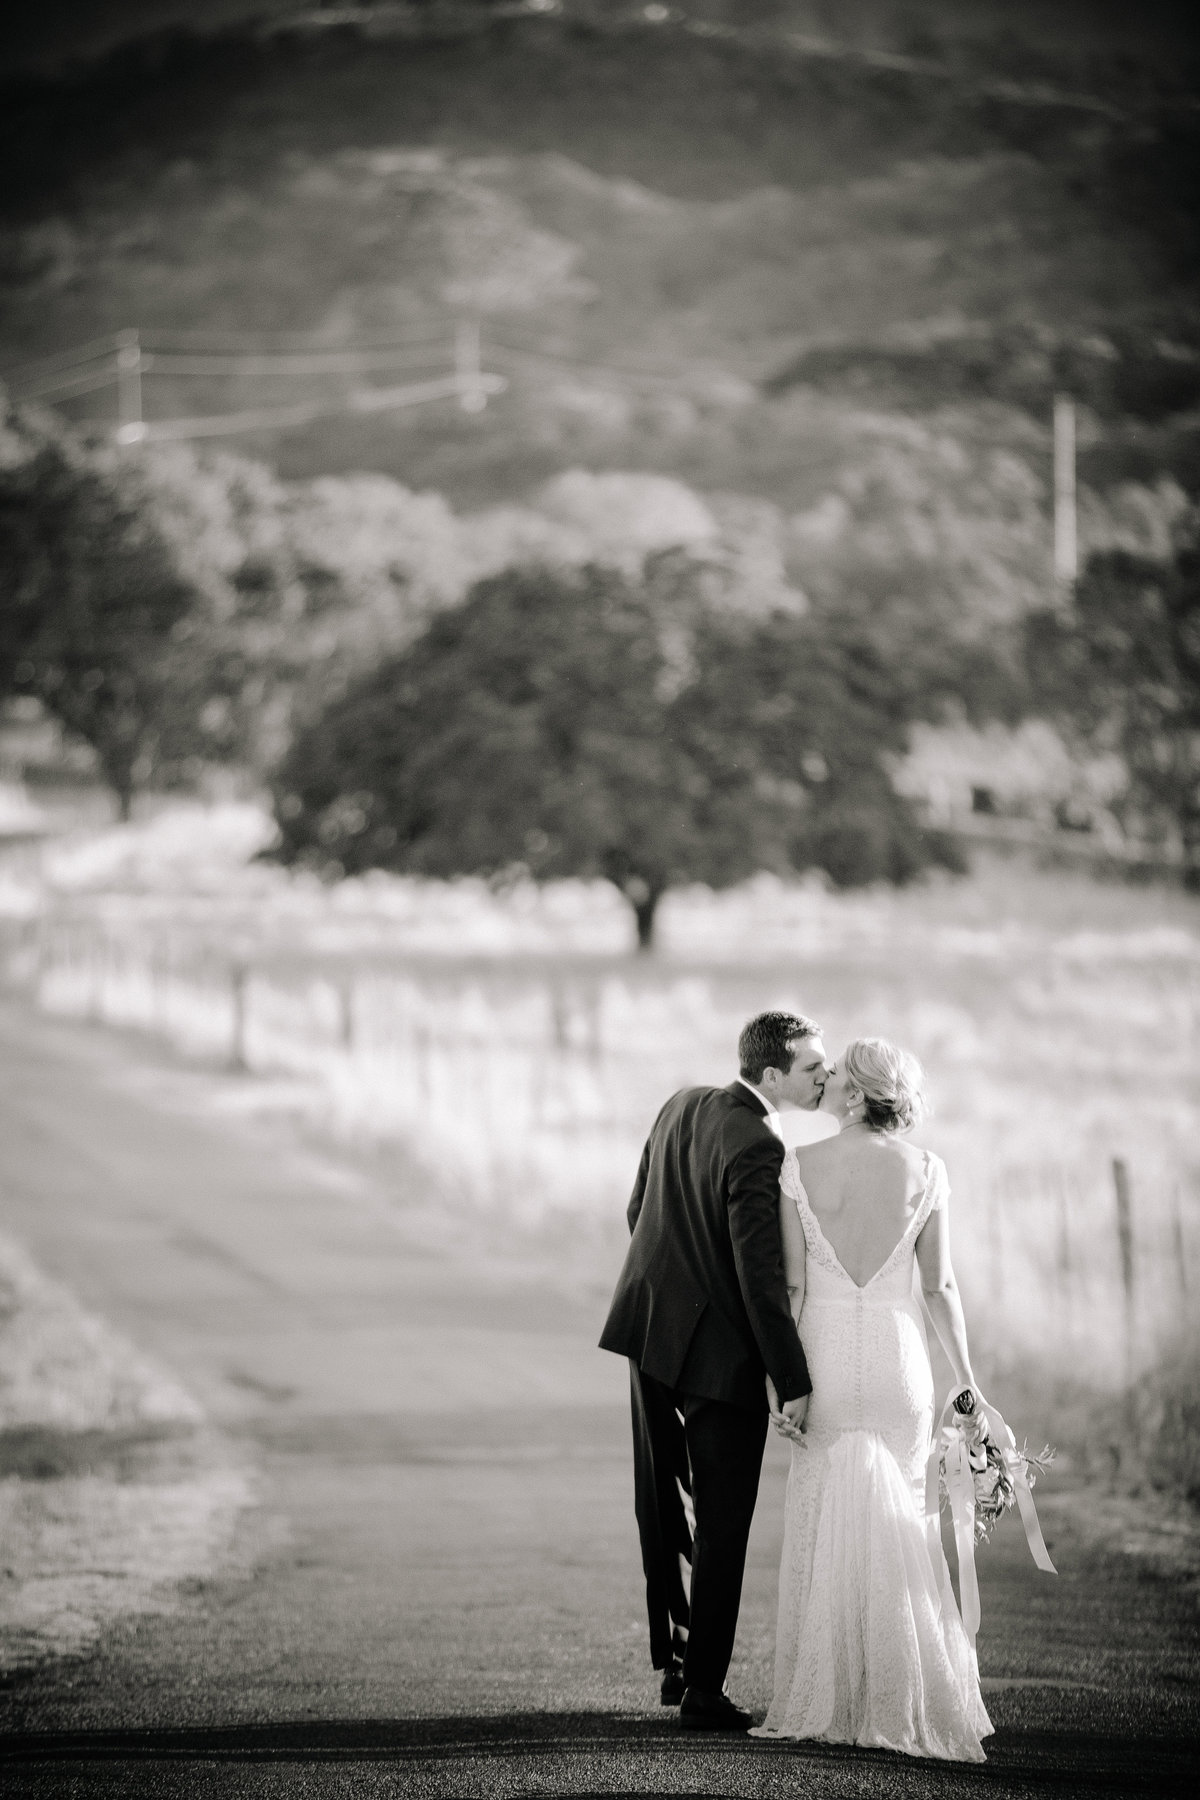 Outdoor wedding at Beltane Ranch in Sonoma.